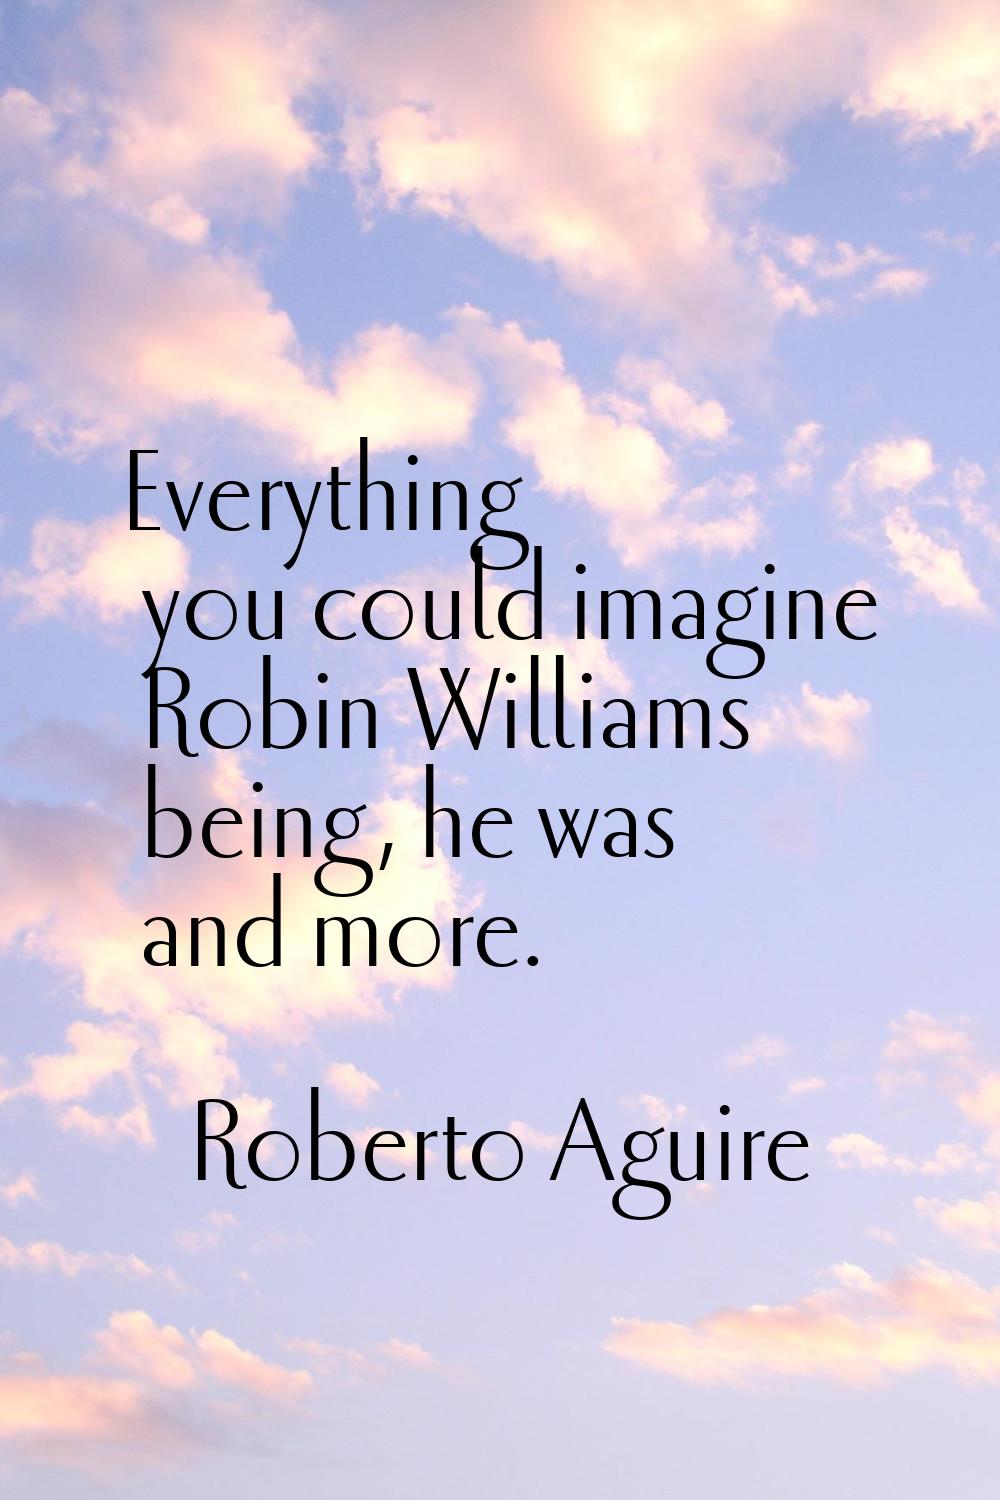 Everything you could imagine Robin Williams being, he was and more.